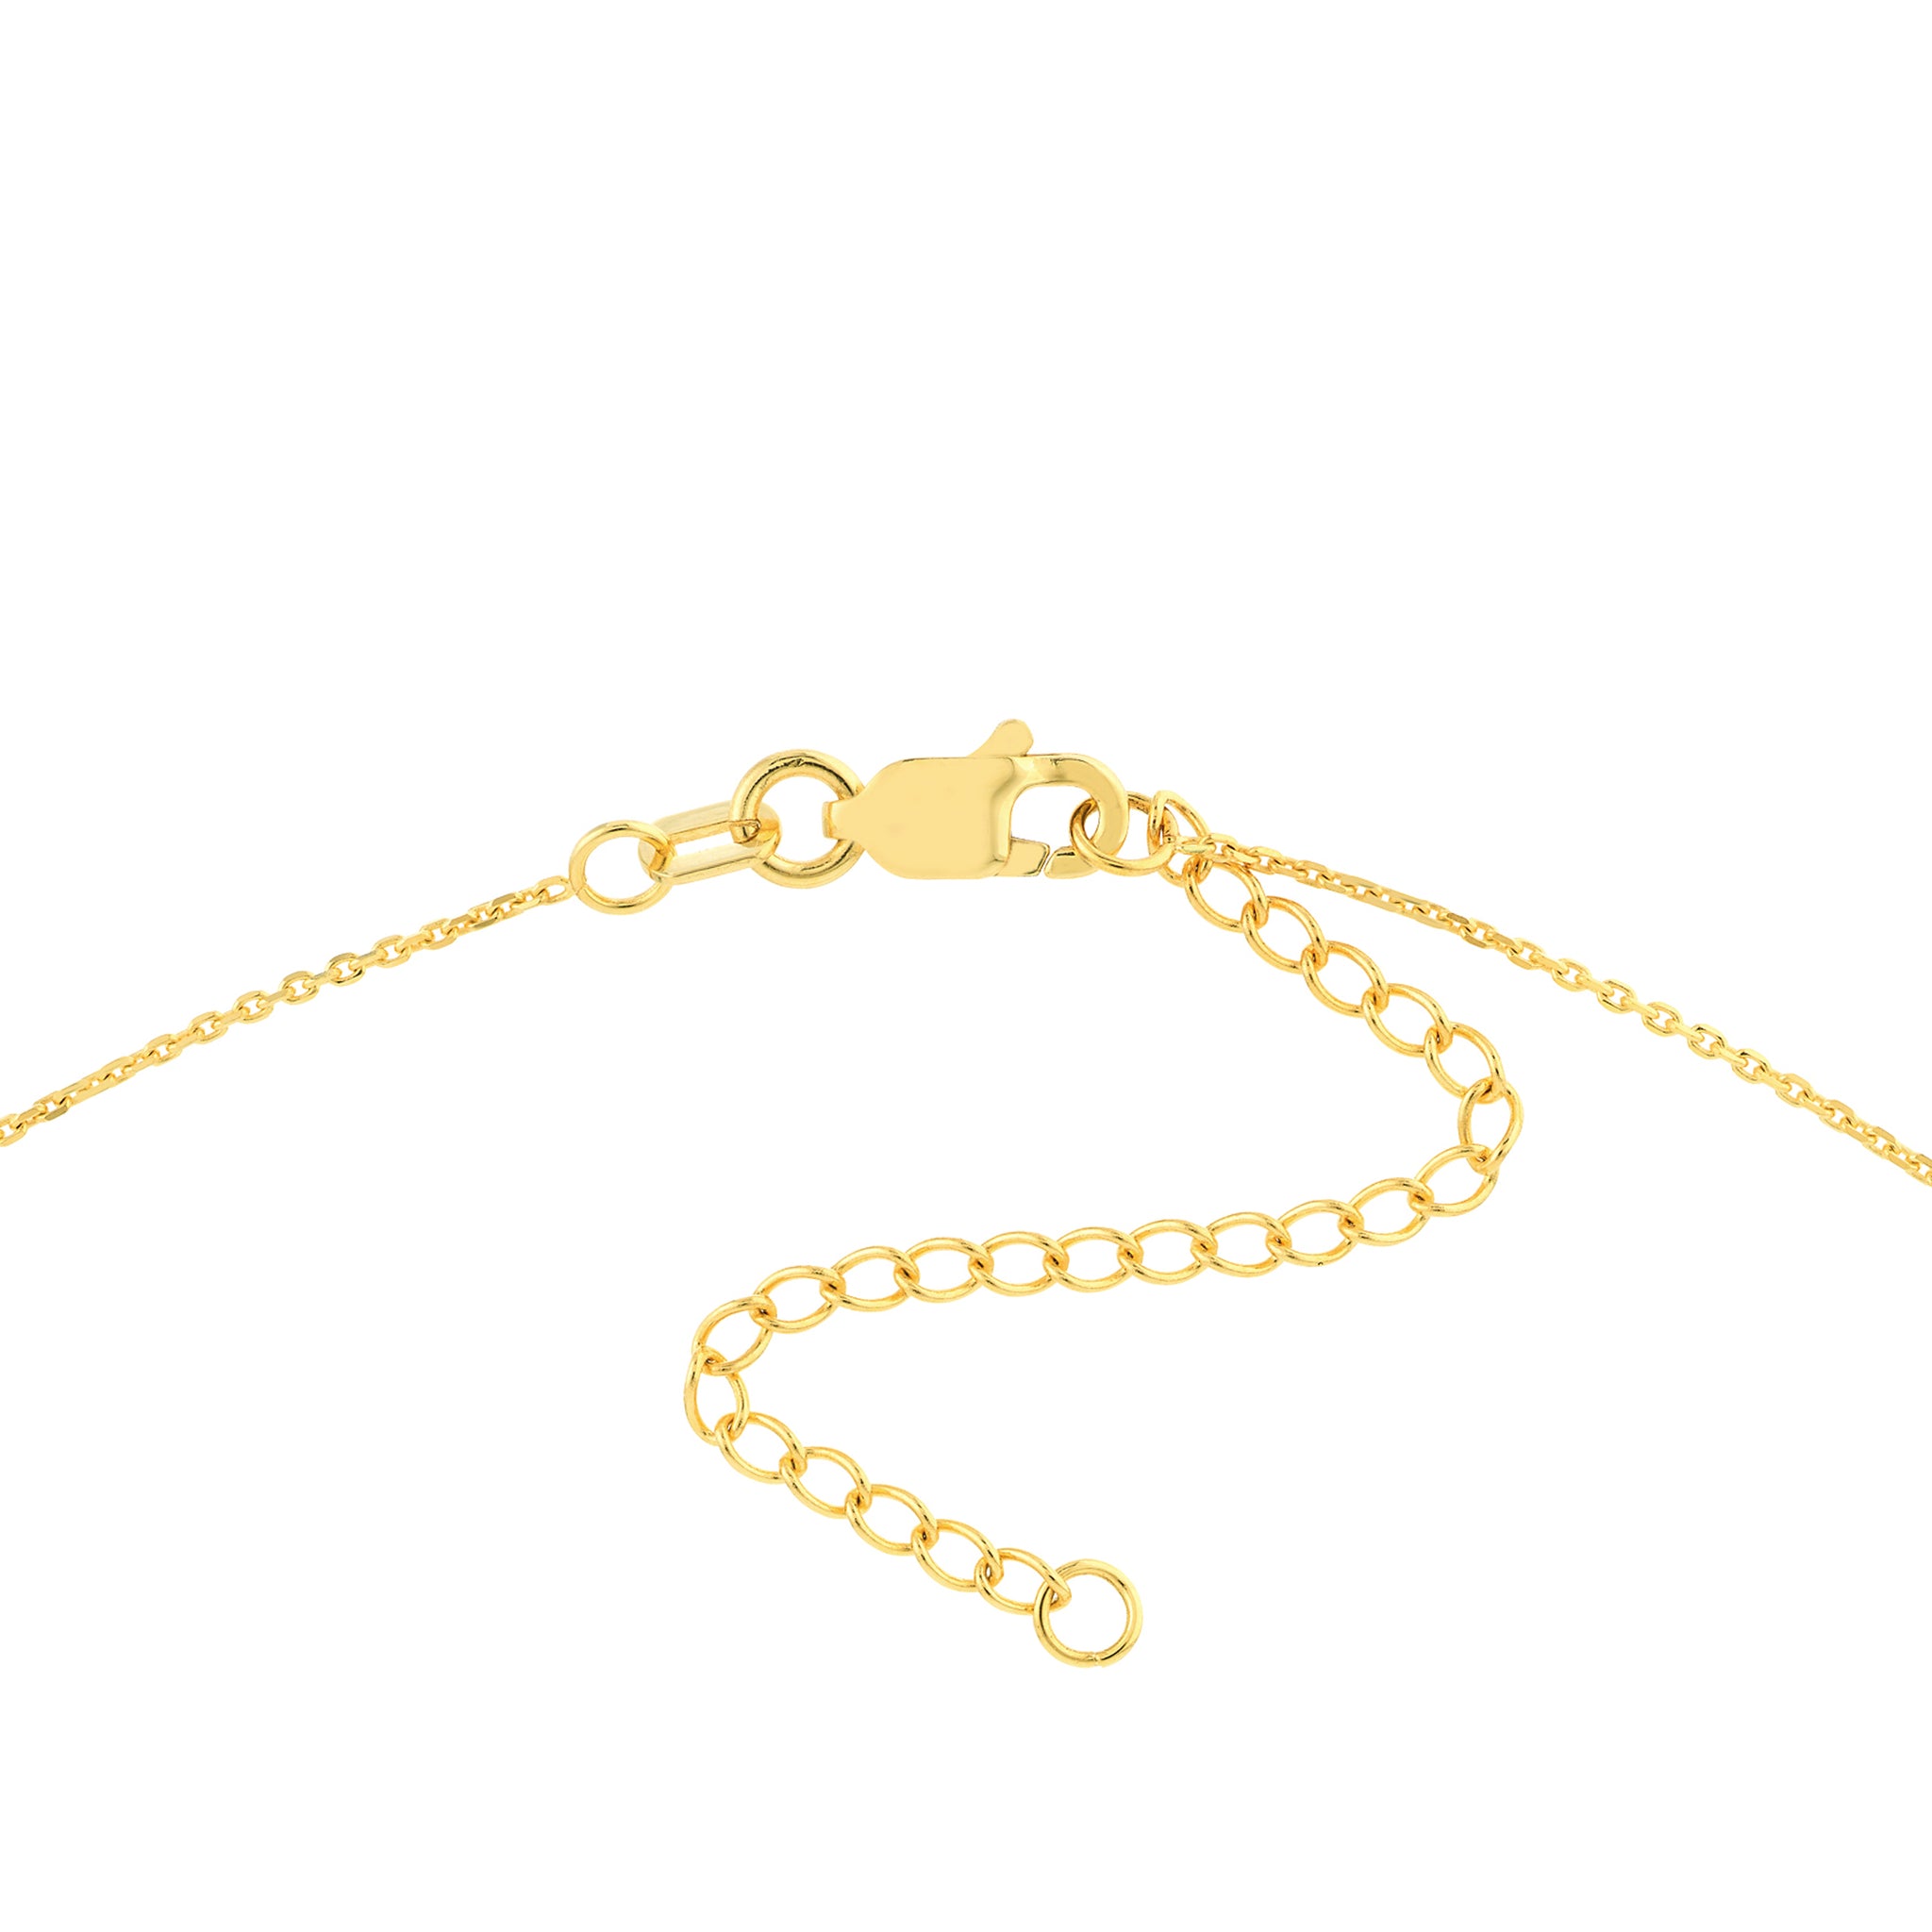 Hemsleys Collection 14K Yellow Gold & Diamonds Stars-By-The-Yard Necklace